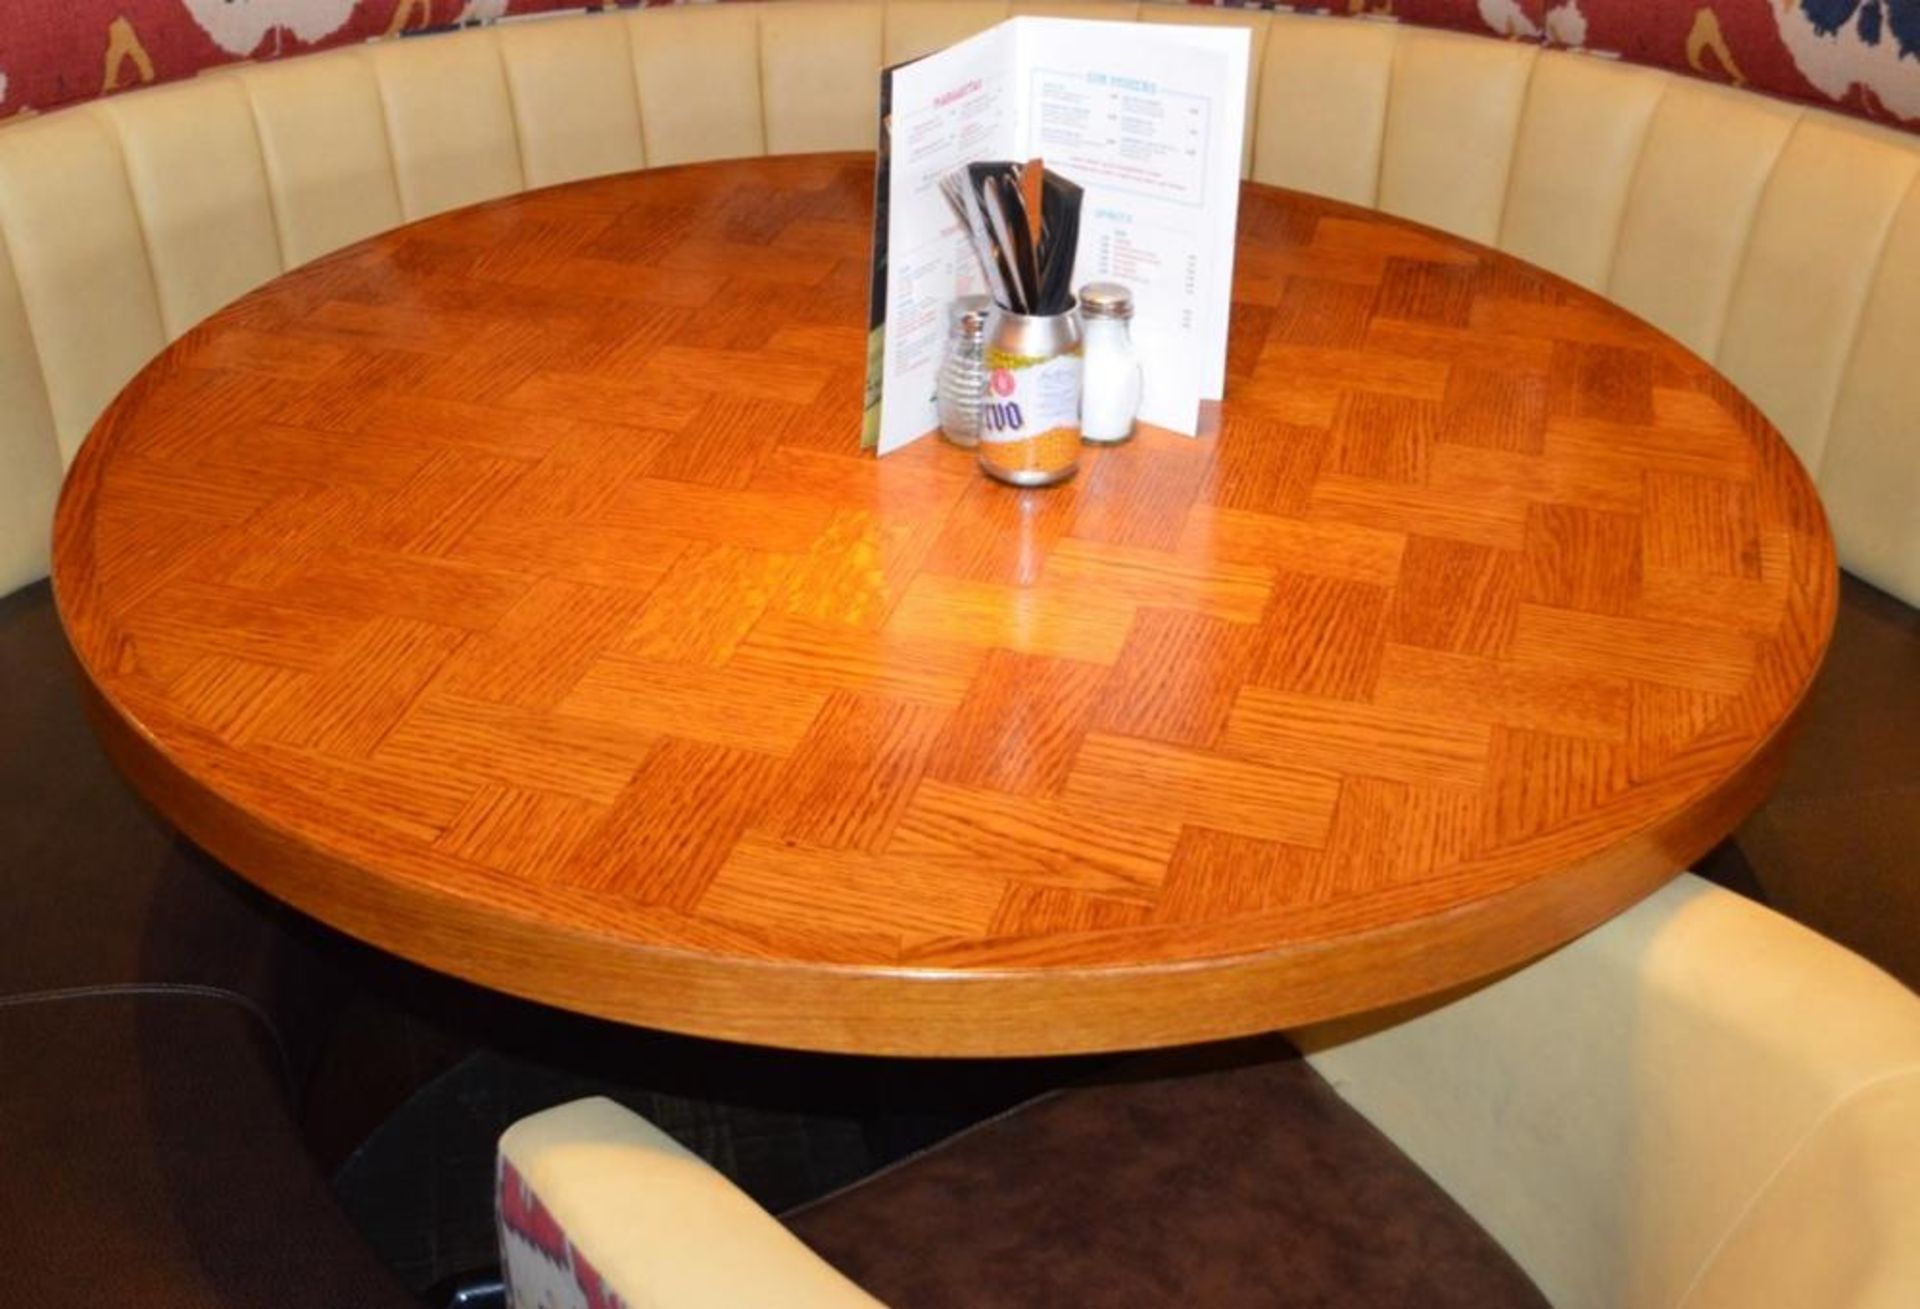 1 x Large Circular Restaurant Dining Table With Parquet Style Top and Cast Iron Base - Image 4 of 6